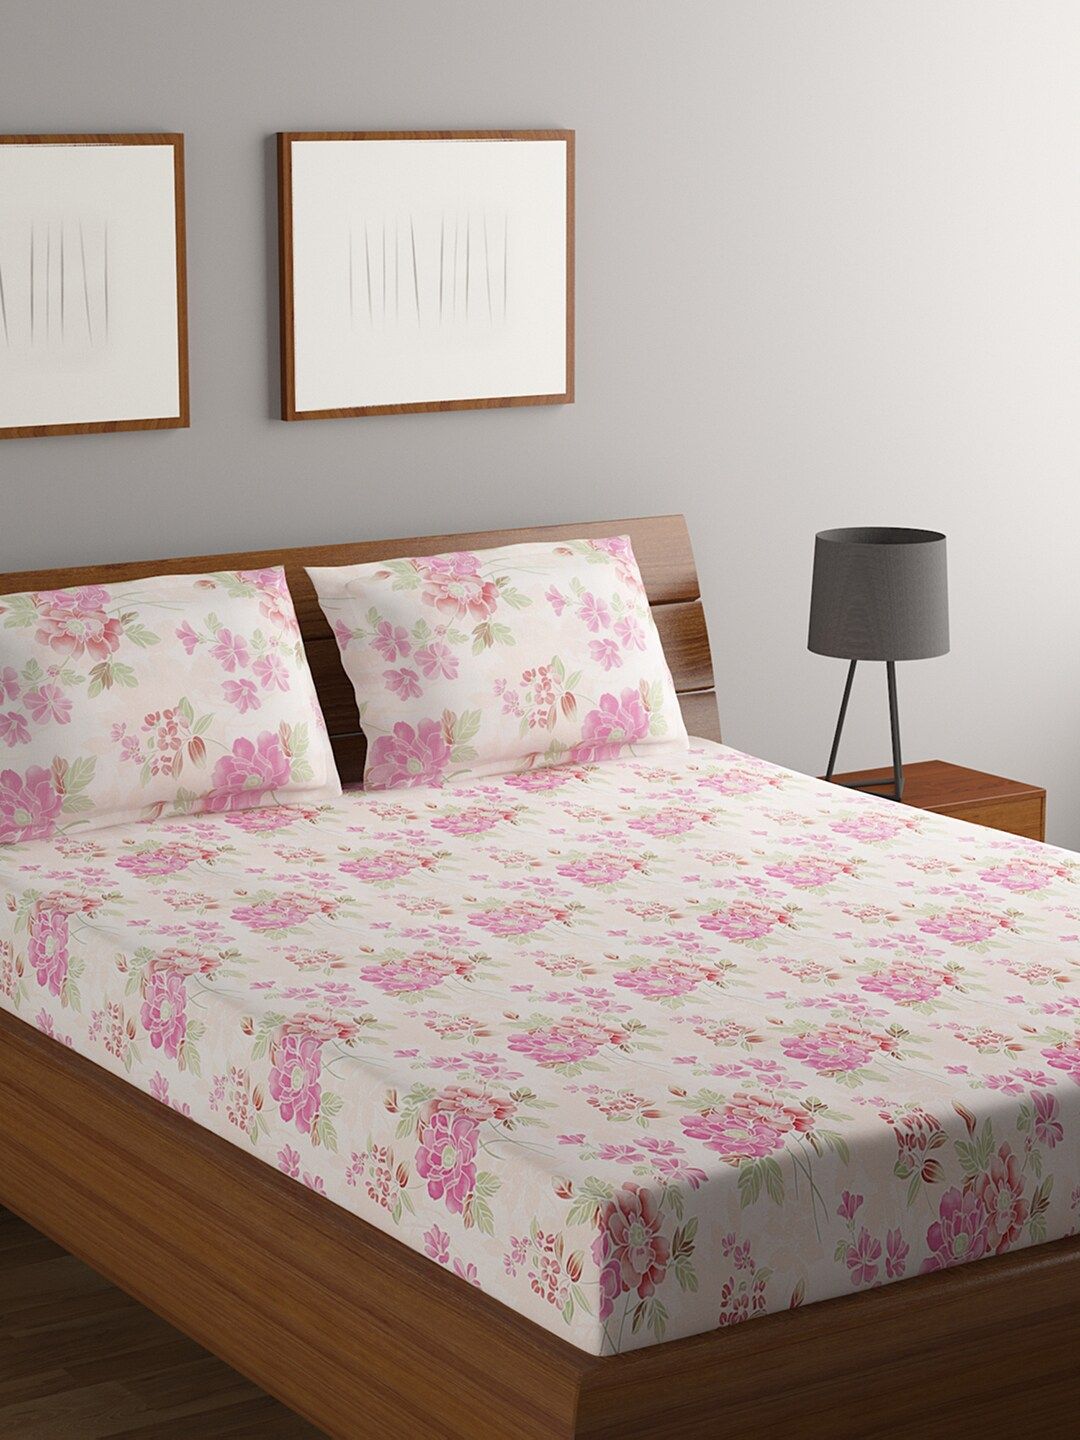 BOMBAY DYEING White & Pink Floral 140 TC Cotton King Bedsheet with 2 Pillow Covers Price in India